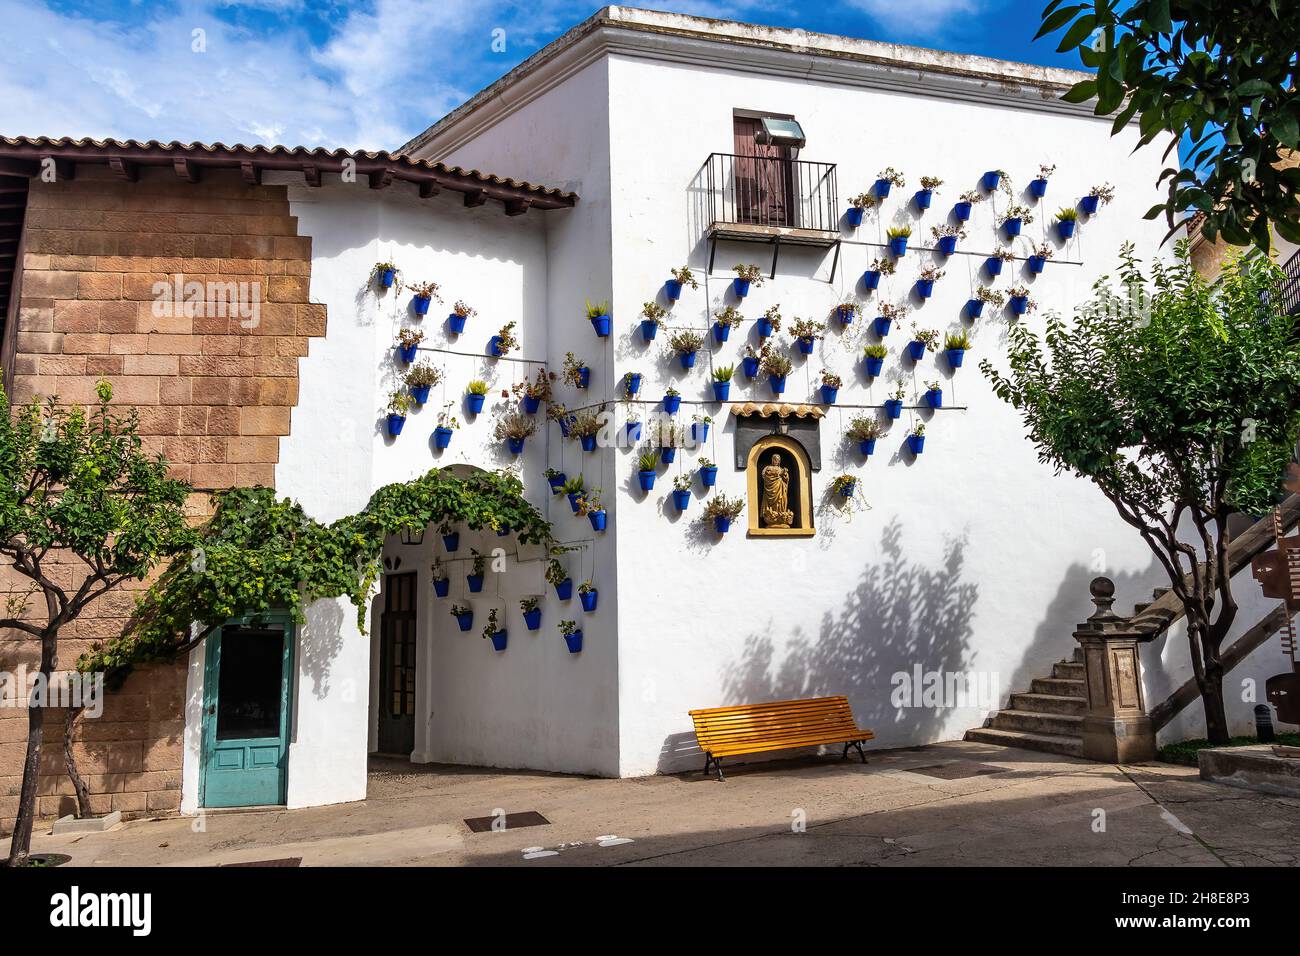 Andalusian neighborhood with blue flower pots hanging on the white walls of Arcos de la frontera, in Poble Espanyol, Spanish Village in Barcelona, Cat Stock Photo